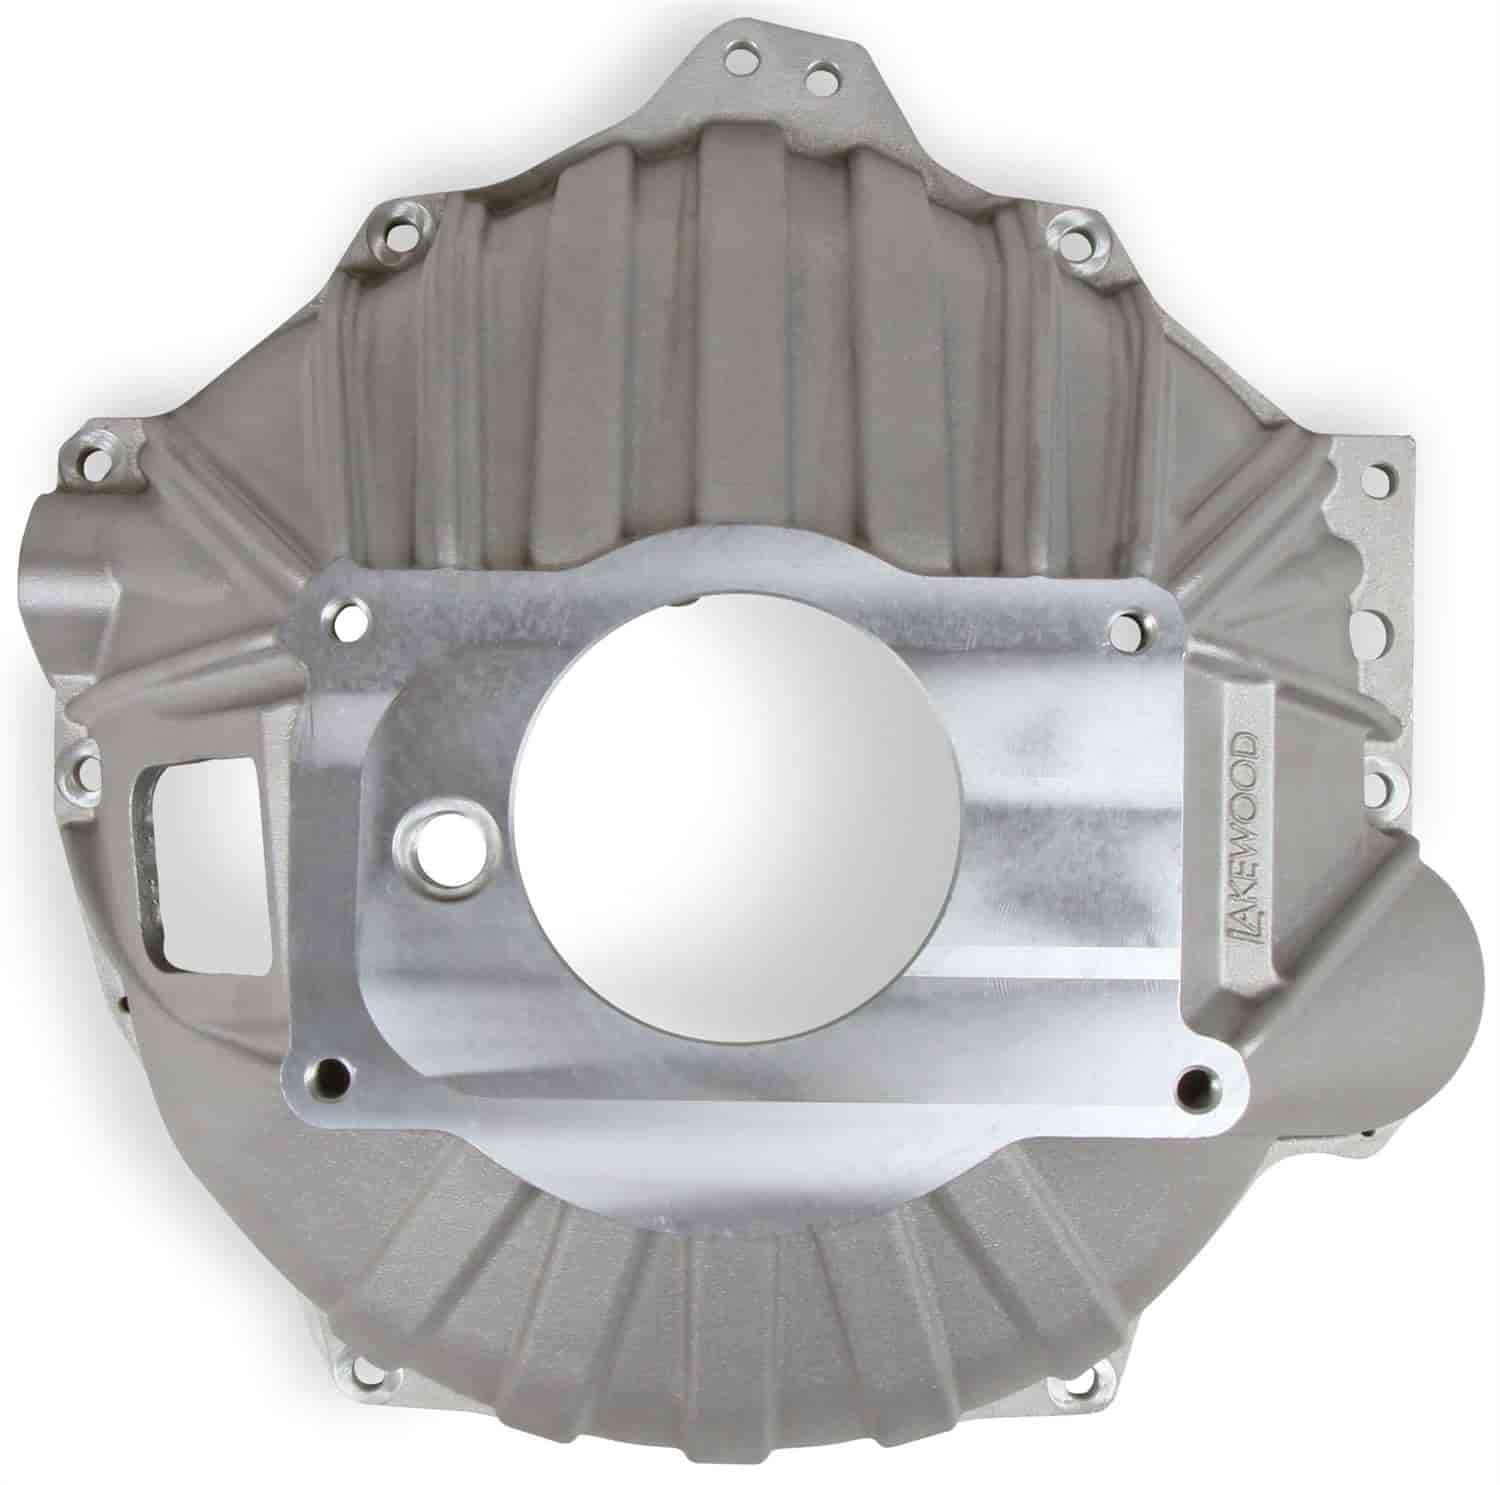 Cast-Aluminum Bellhousing Only for GM LS Gen III/IV, Small Block Chevy, and Big Block Chevy Engines